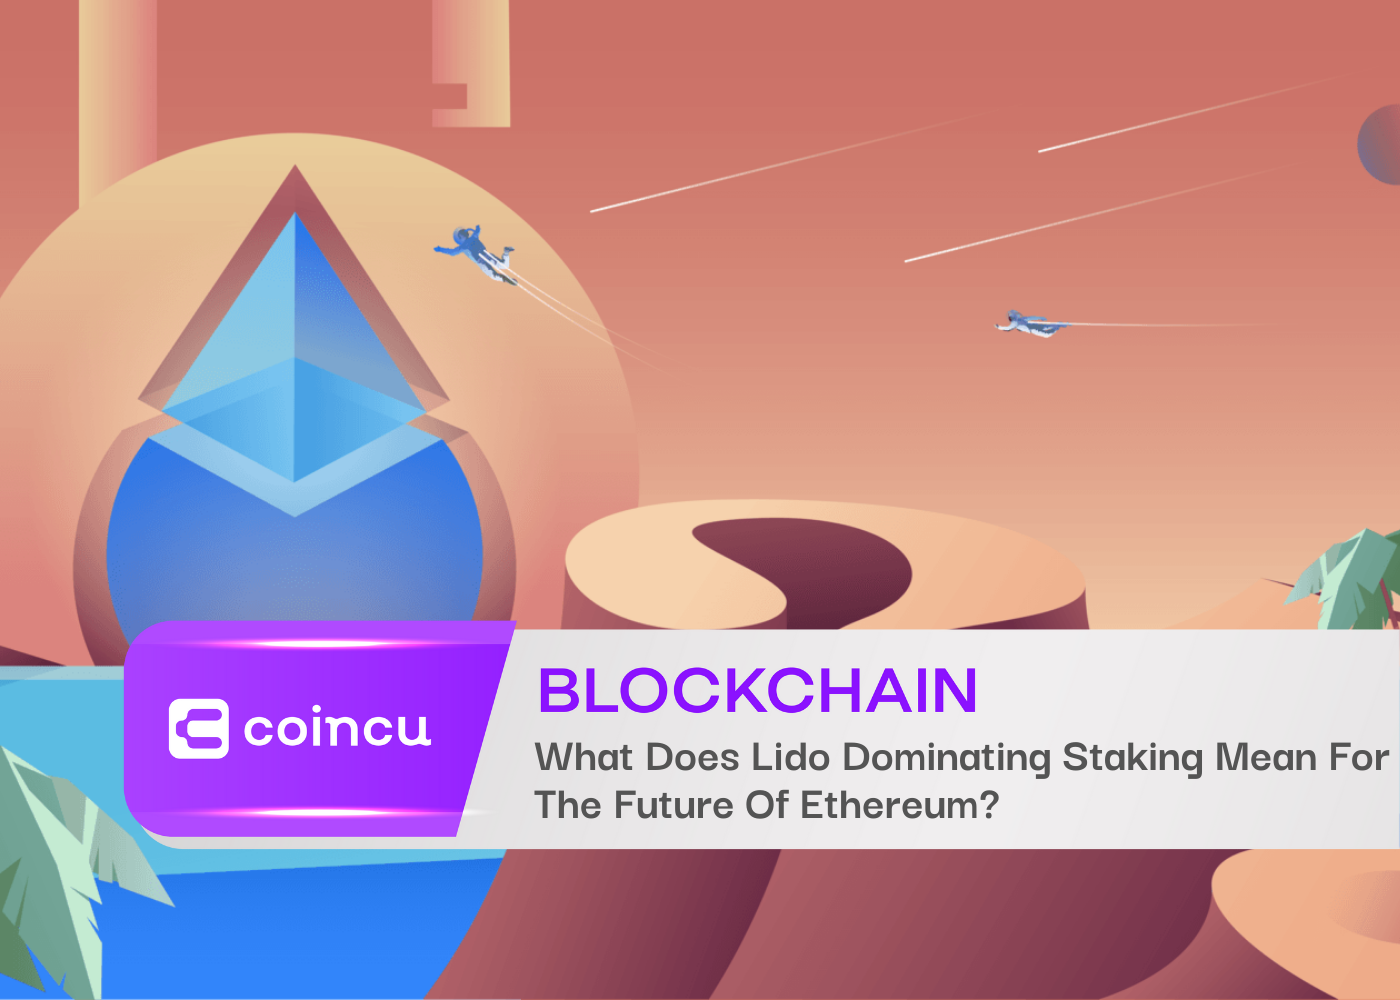 What Does Lido Dominating Staking Mean For The Future Of Ethereum?